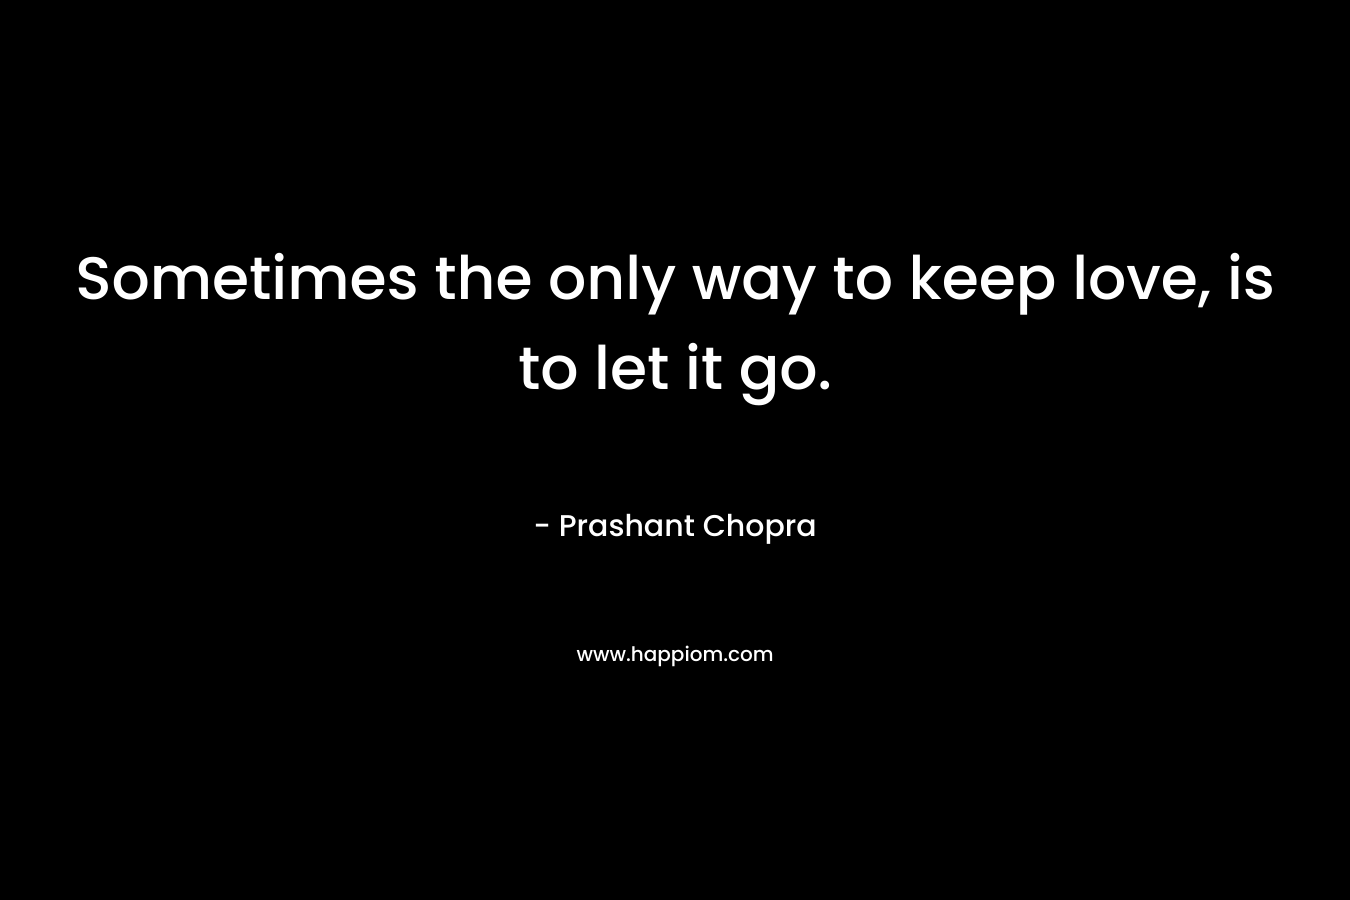 Sometimes the only way to keep love, is to let it go. – Prashant Chopra